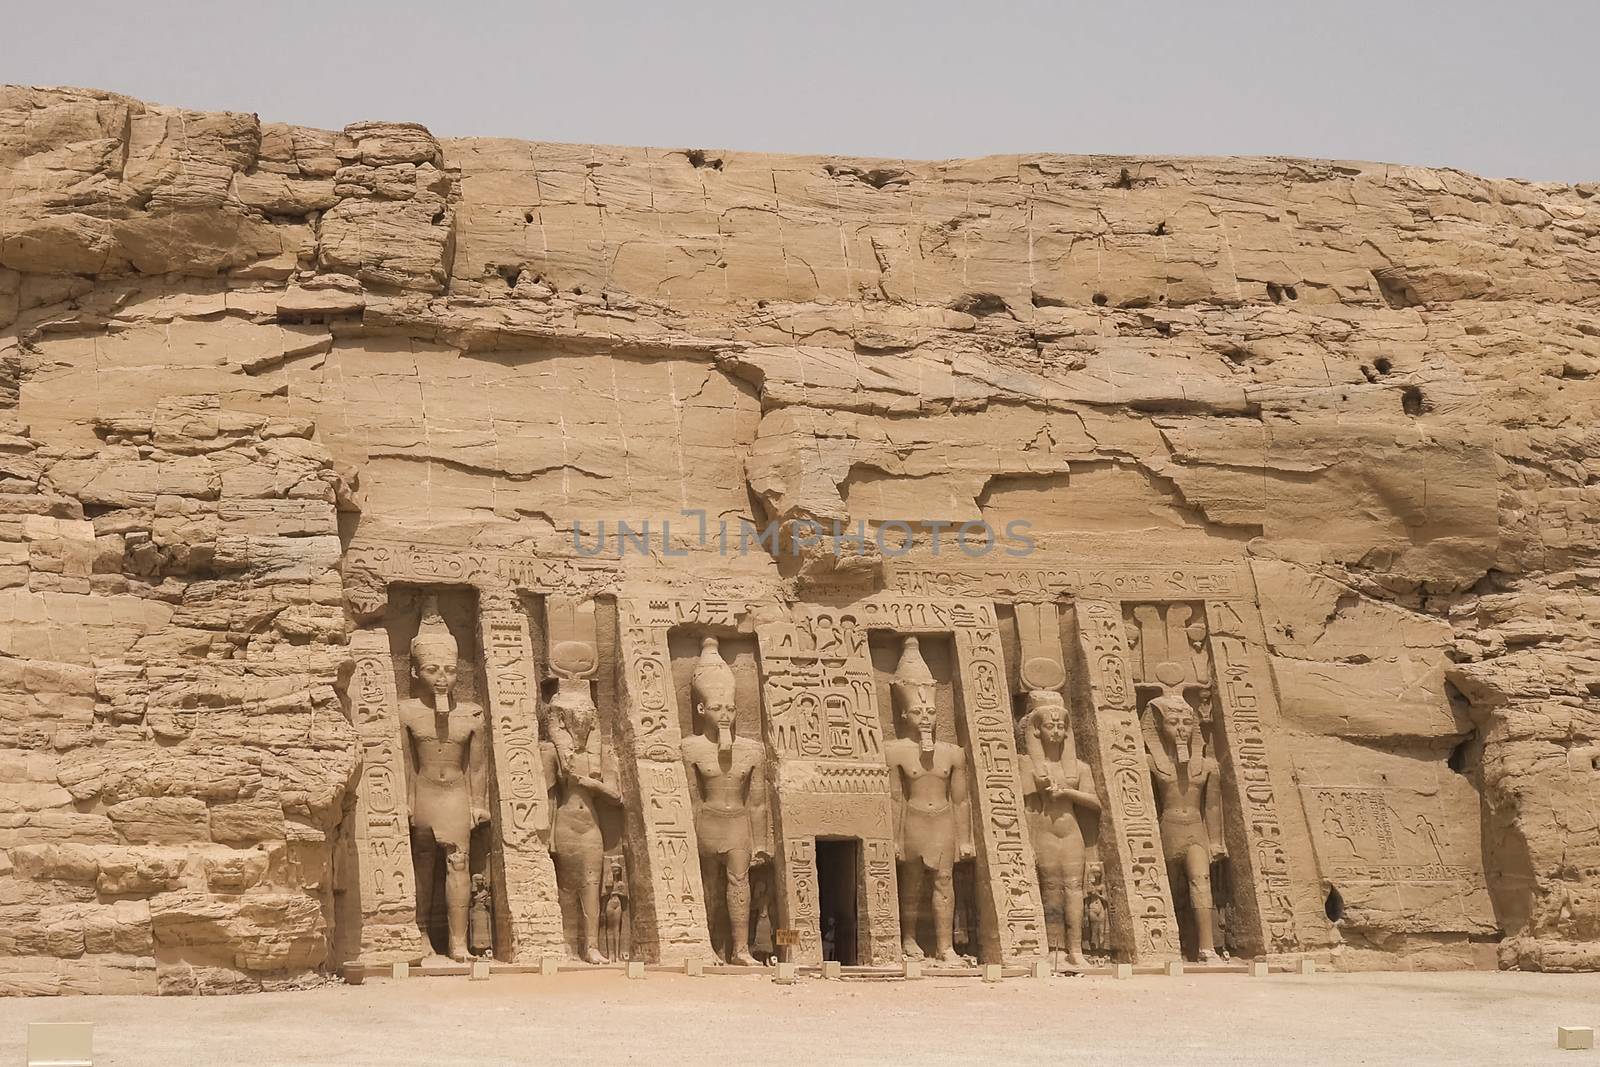 Statues of other Egypt. With the temple monuments megaliths